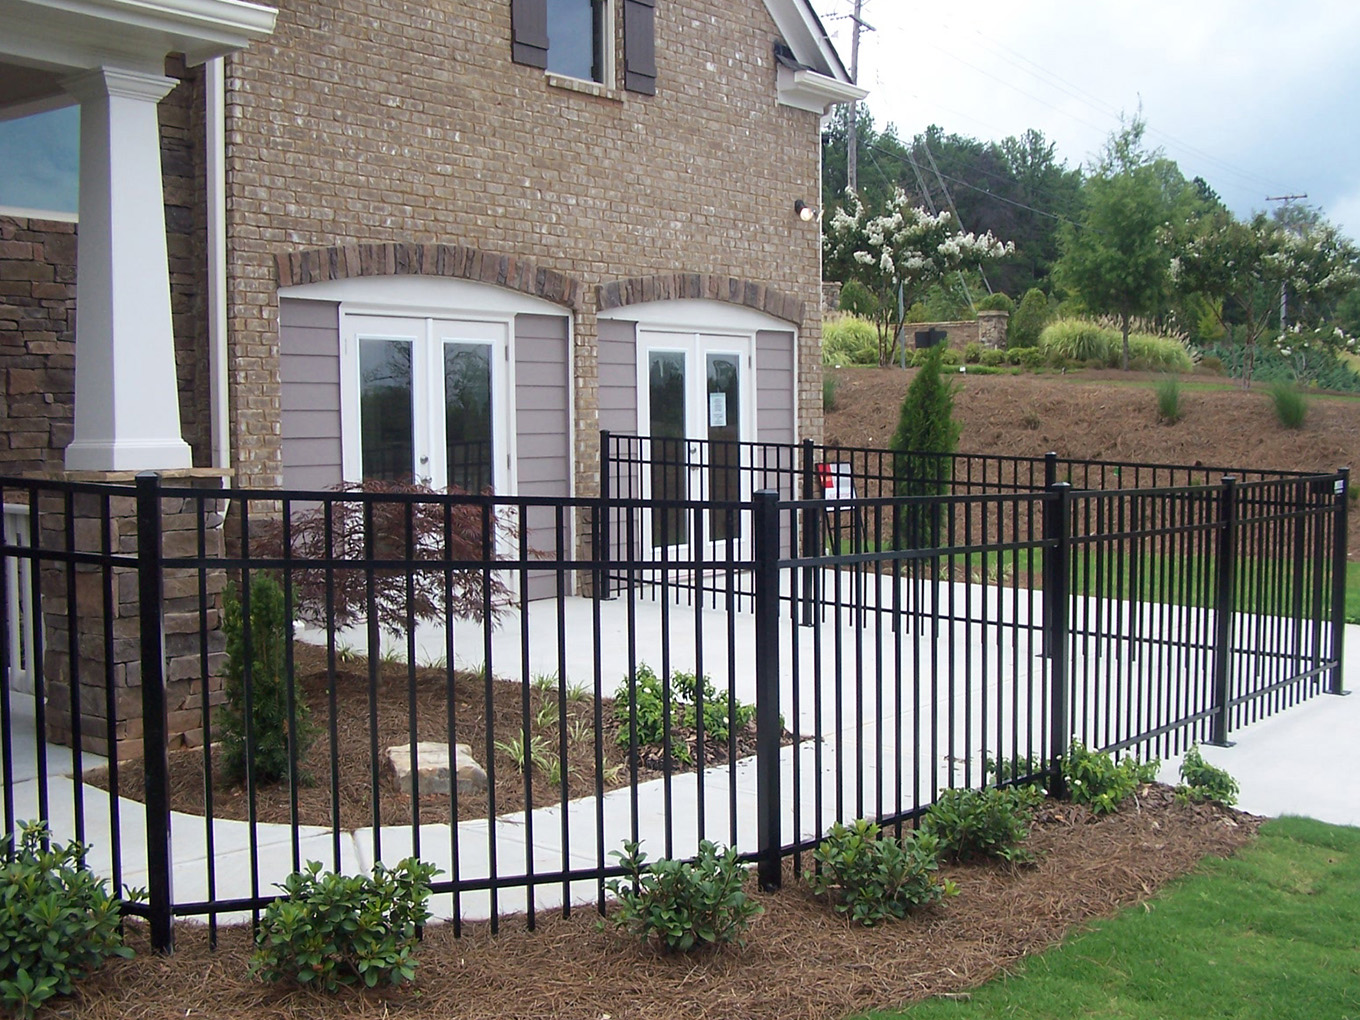 Photo of an aluminum fence surrounding a residential property